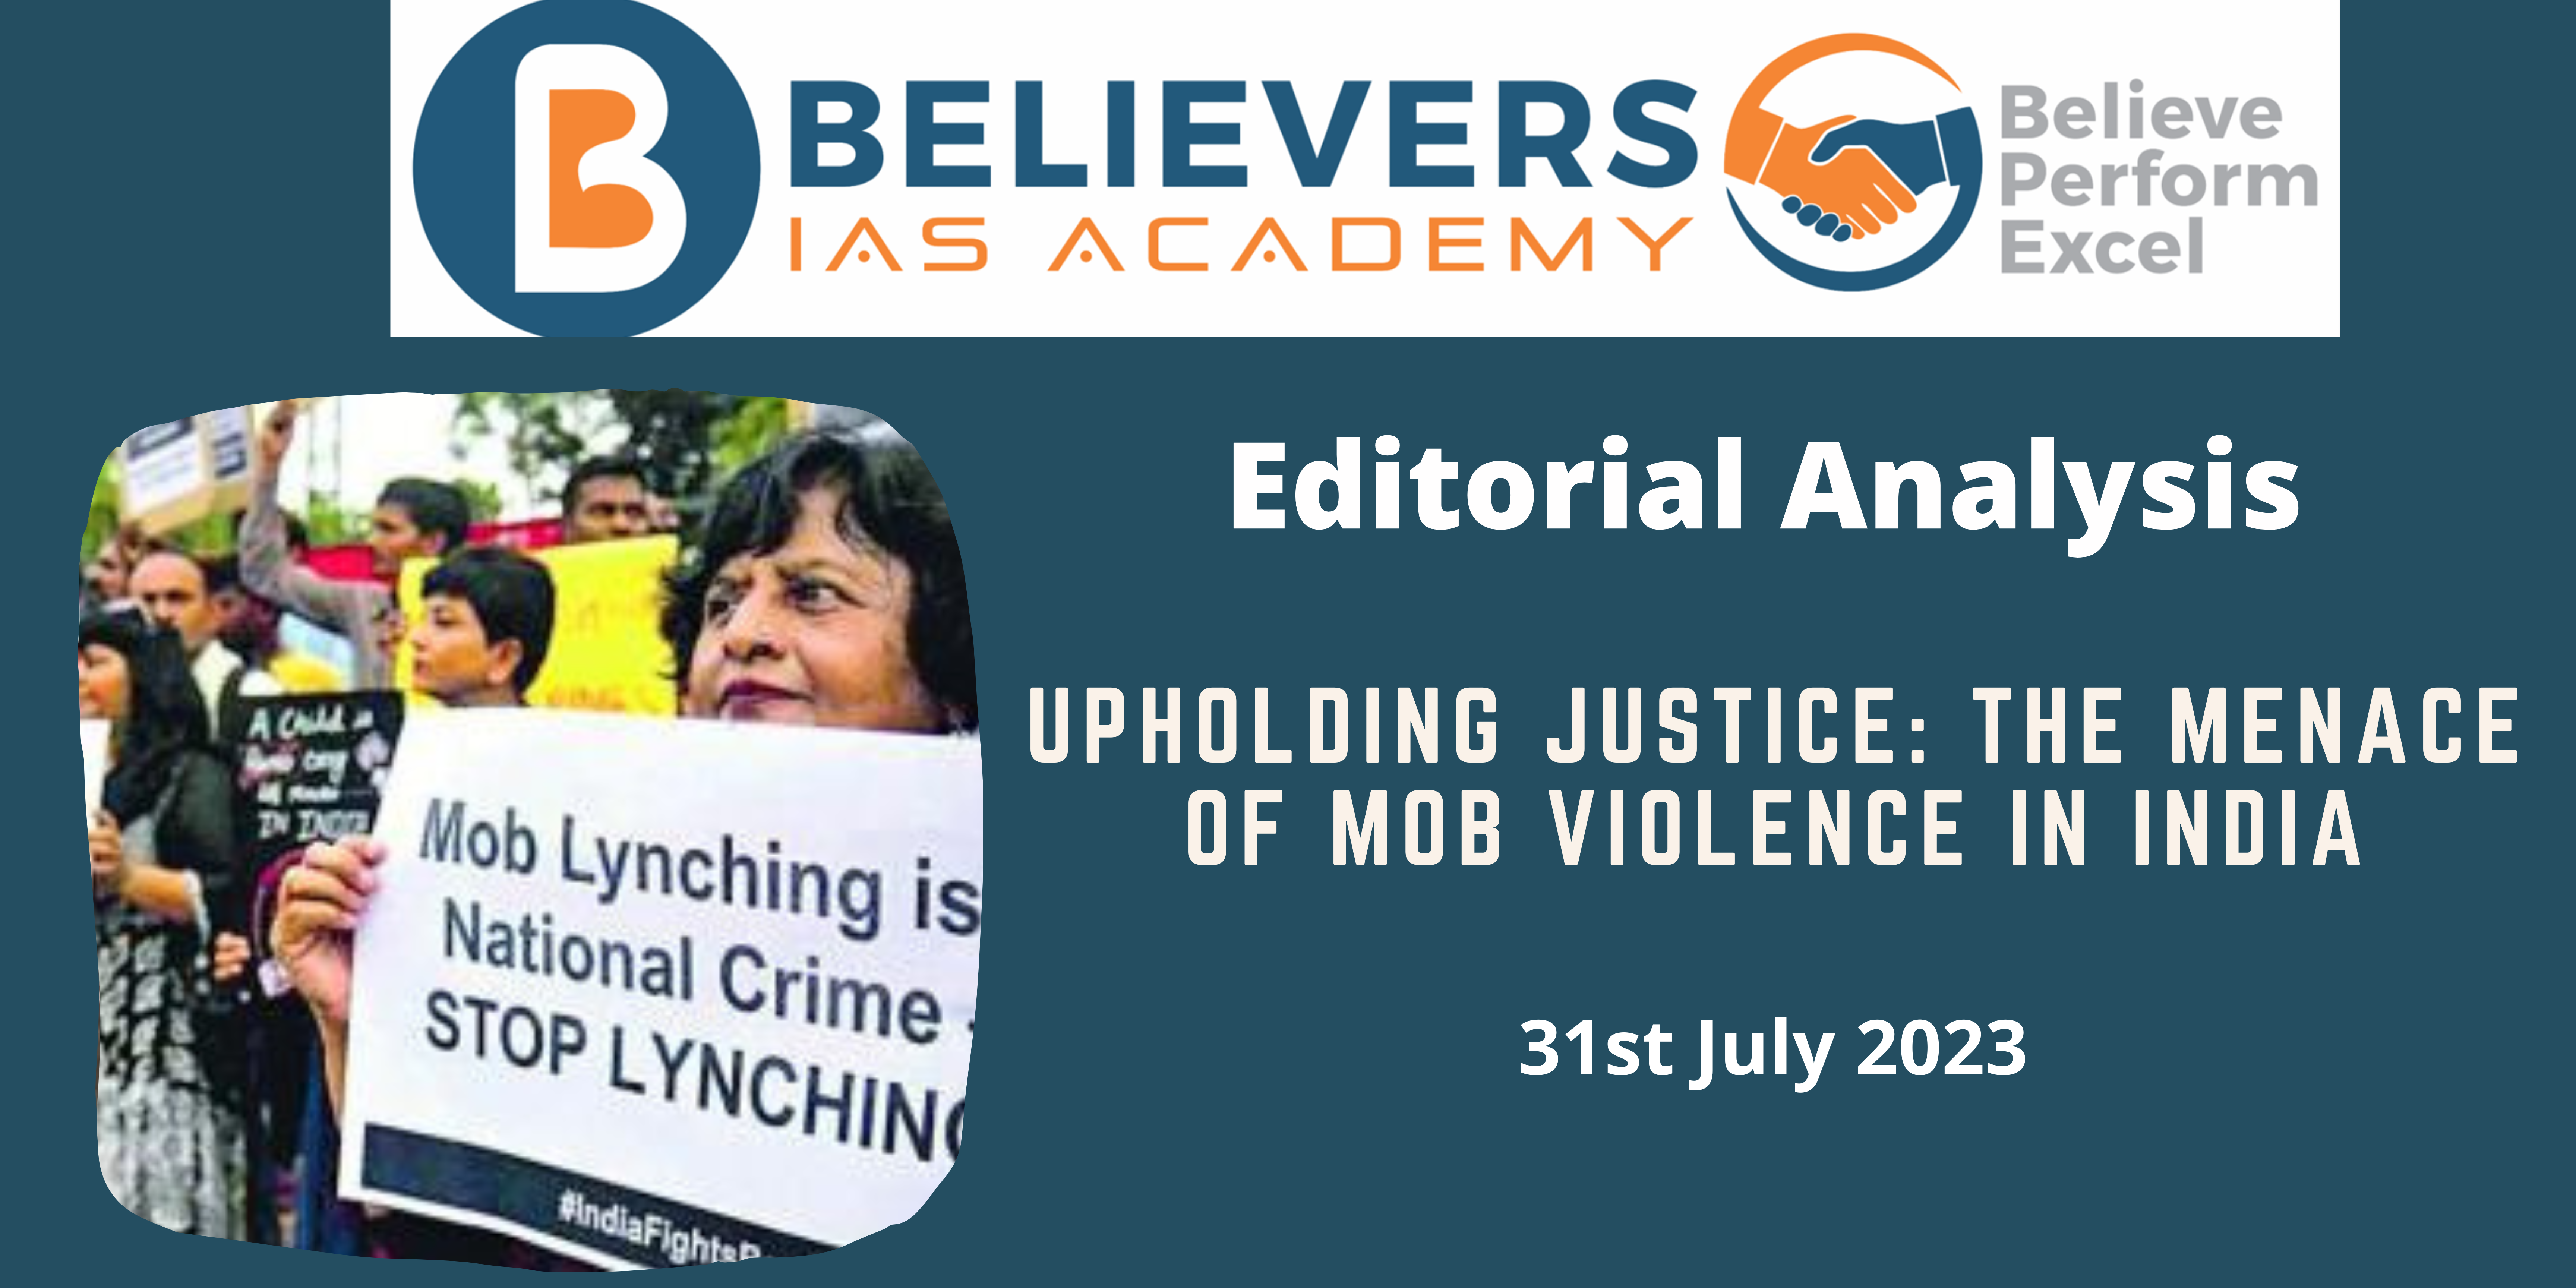 Upholding Justice: The Menace of Mob Violence in India